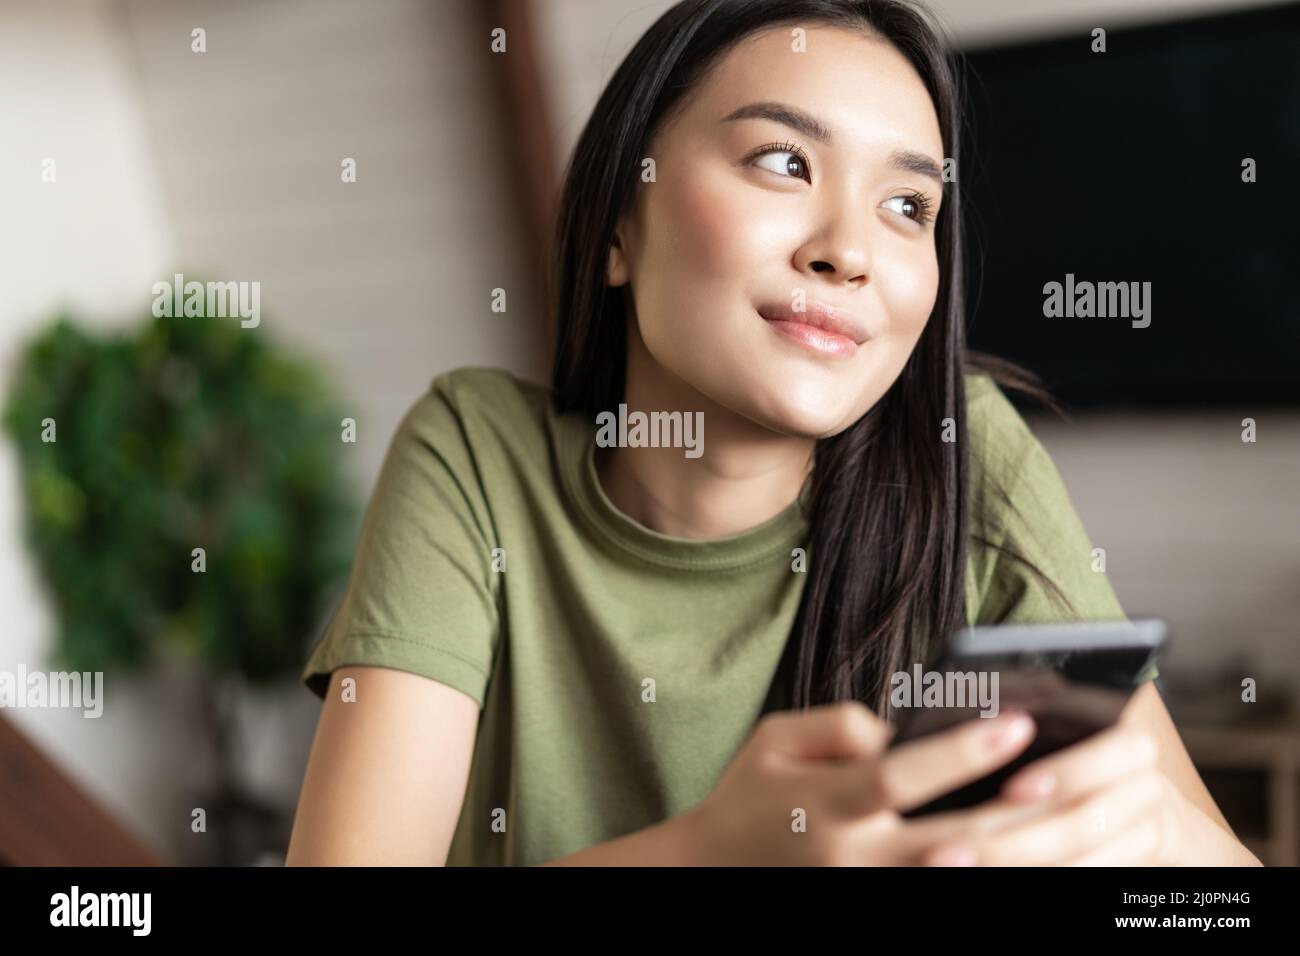 Young dreamy woman looking outside window, holding smartphone and smiling, chatting on phone app Stock Photo